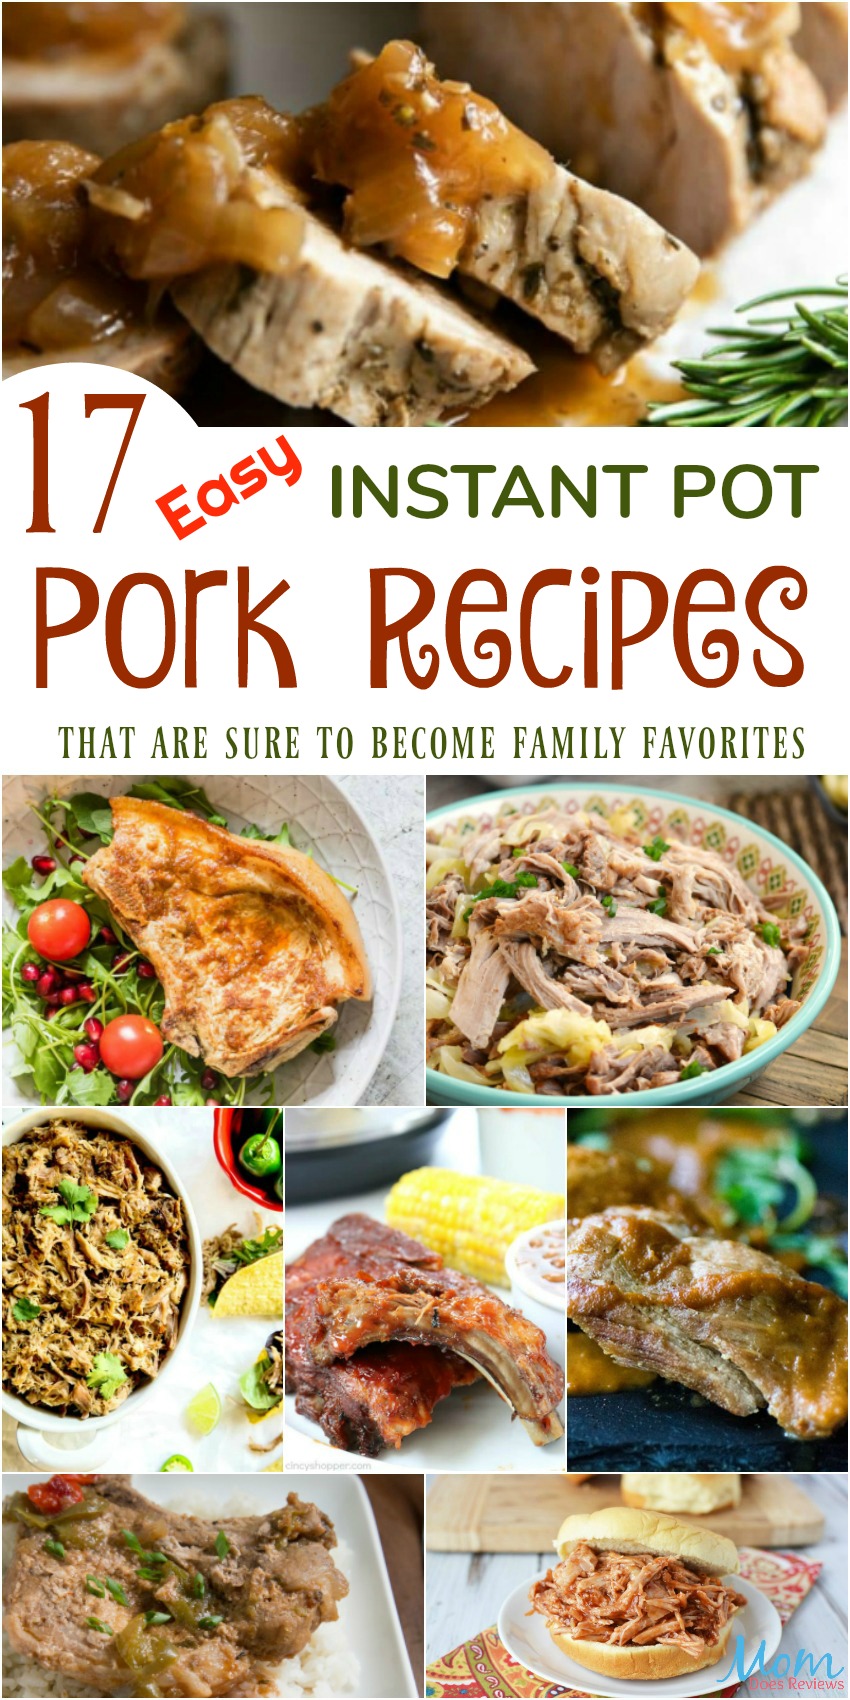 17 Easy Instant Pot Pork Recipes that are Sure to Become Family Favorites